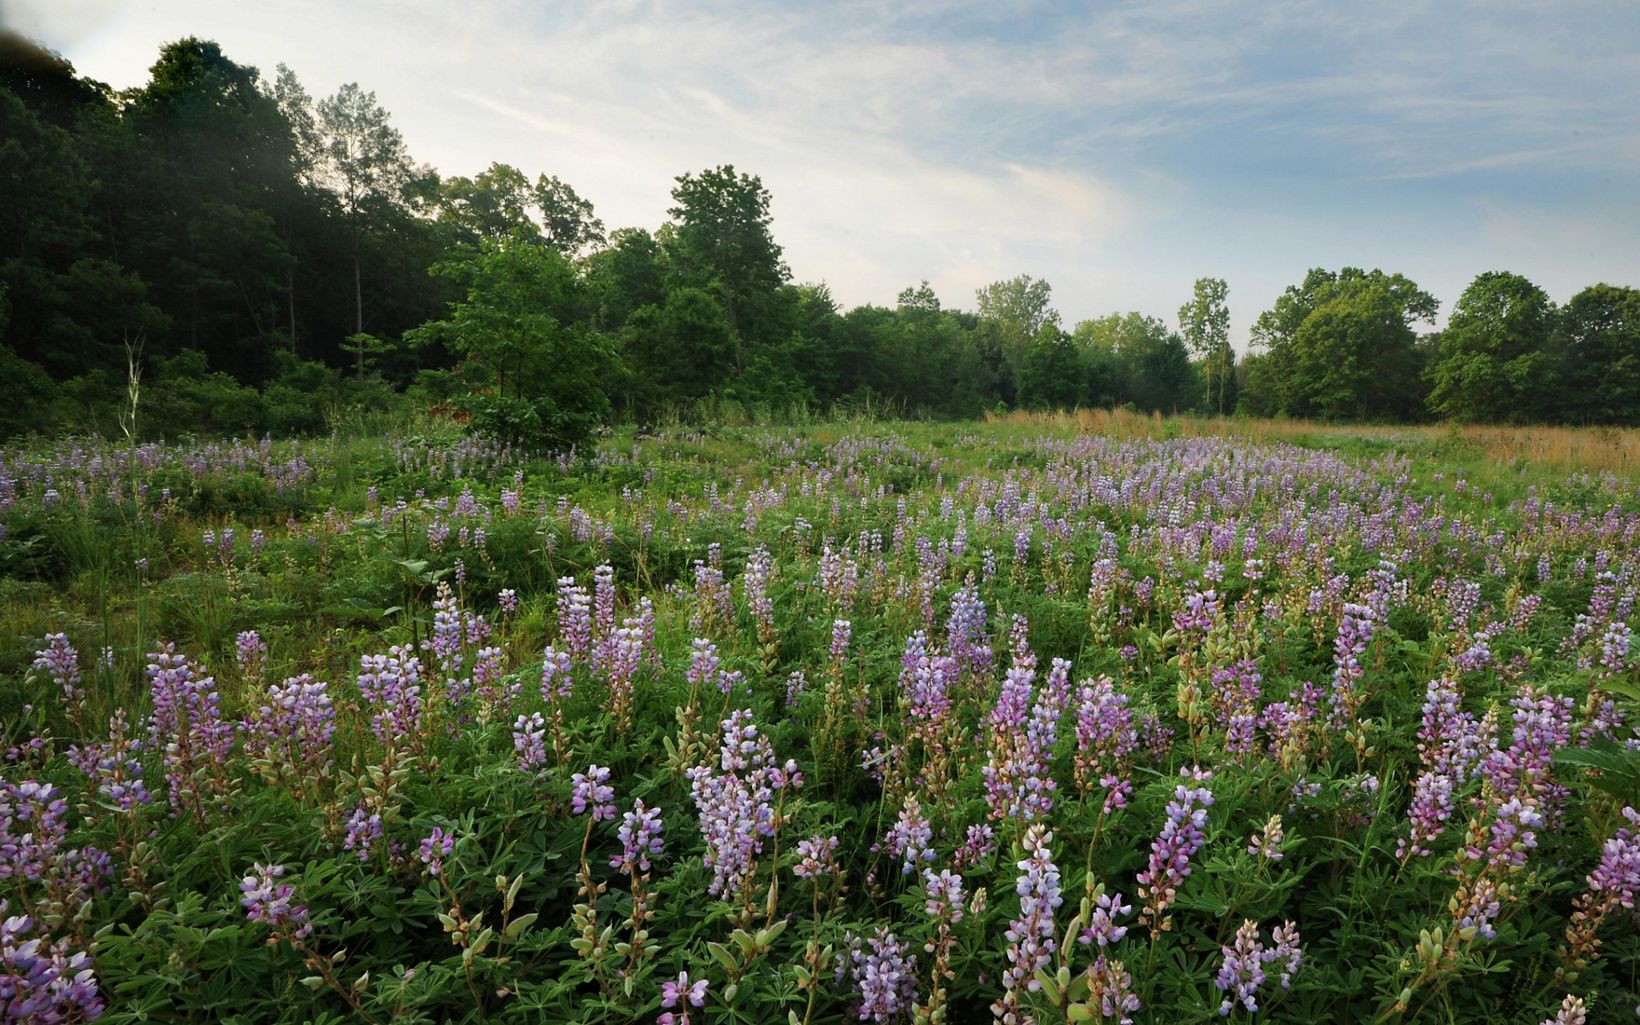 An open field covered with green foliage and purple spikes of flowers.